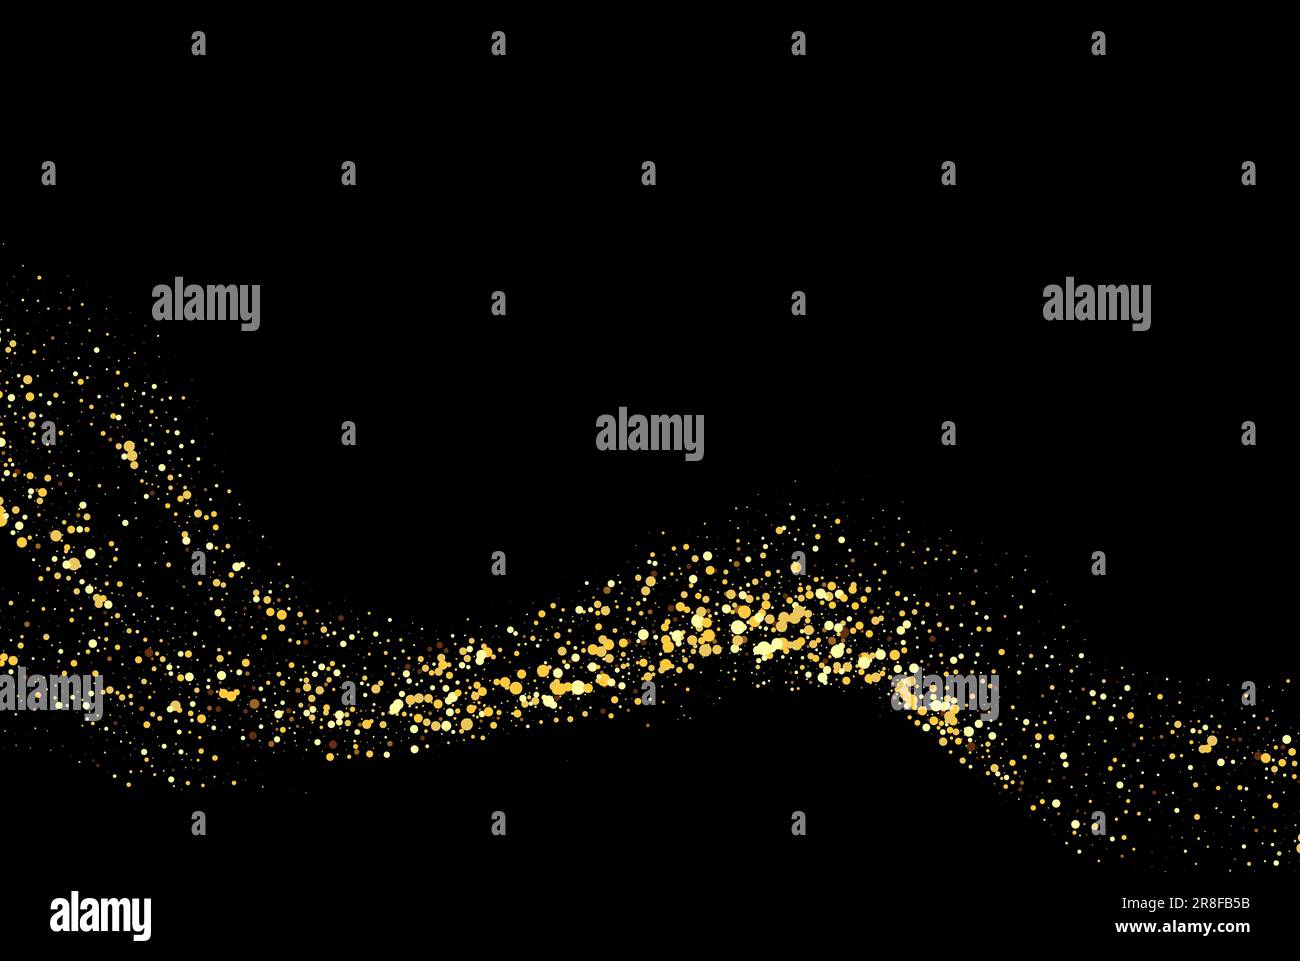 Sparkling wave of confetti. Vector golden sparkling wavy flow on black background. Stock Vector